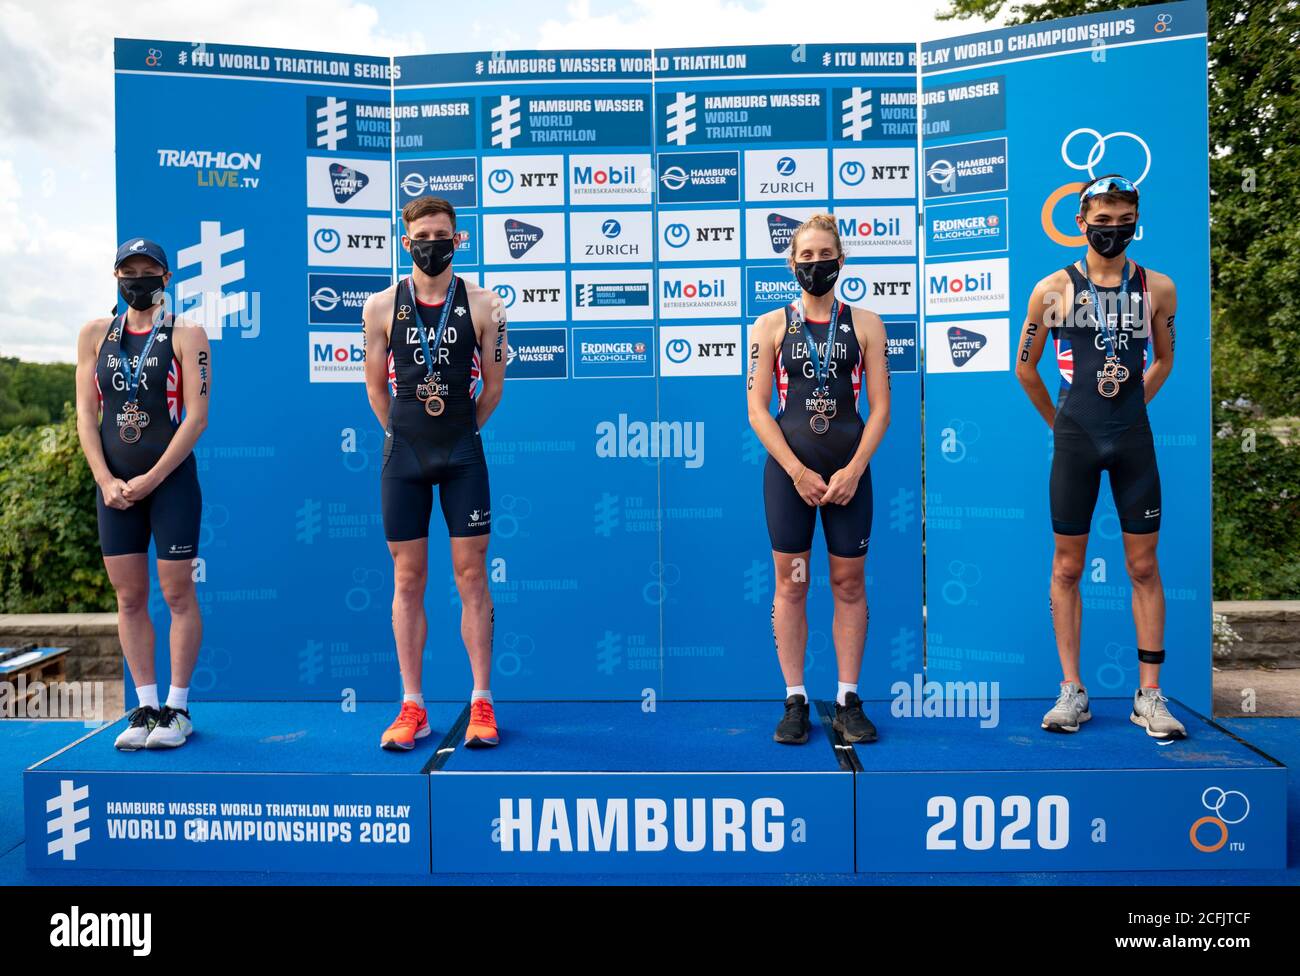 Hamburg, Germany. 06th Sep, 2020. Triathlon: ITU World Triathlon Series/World Championship, Mixed. The British team Georgia Taylor-Brown (l-r), Barclay Izzard, Jessica Learmonth and Alex Yee are on the podium after winning the bronze medal at the World Championship. Credit: Axel Heimken/dpa/Alamy Live News Stock Photo